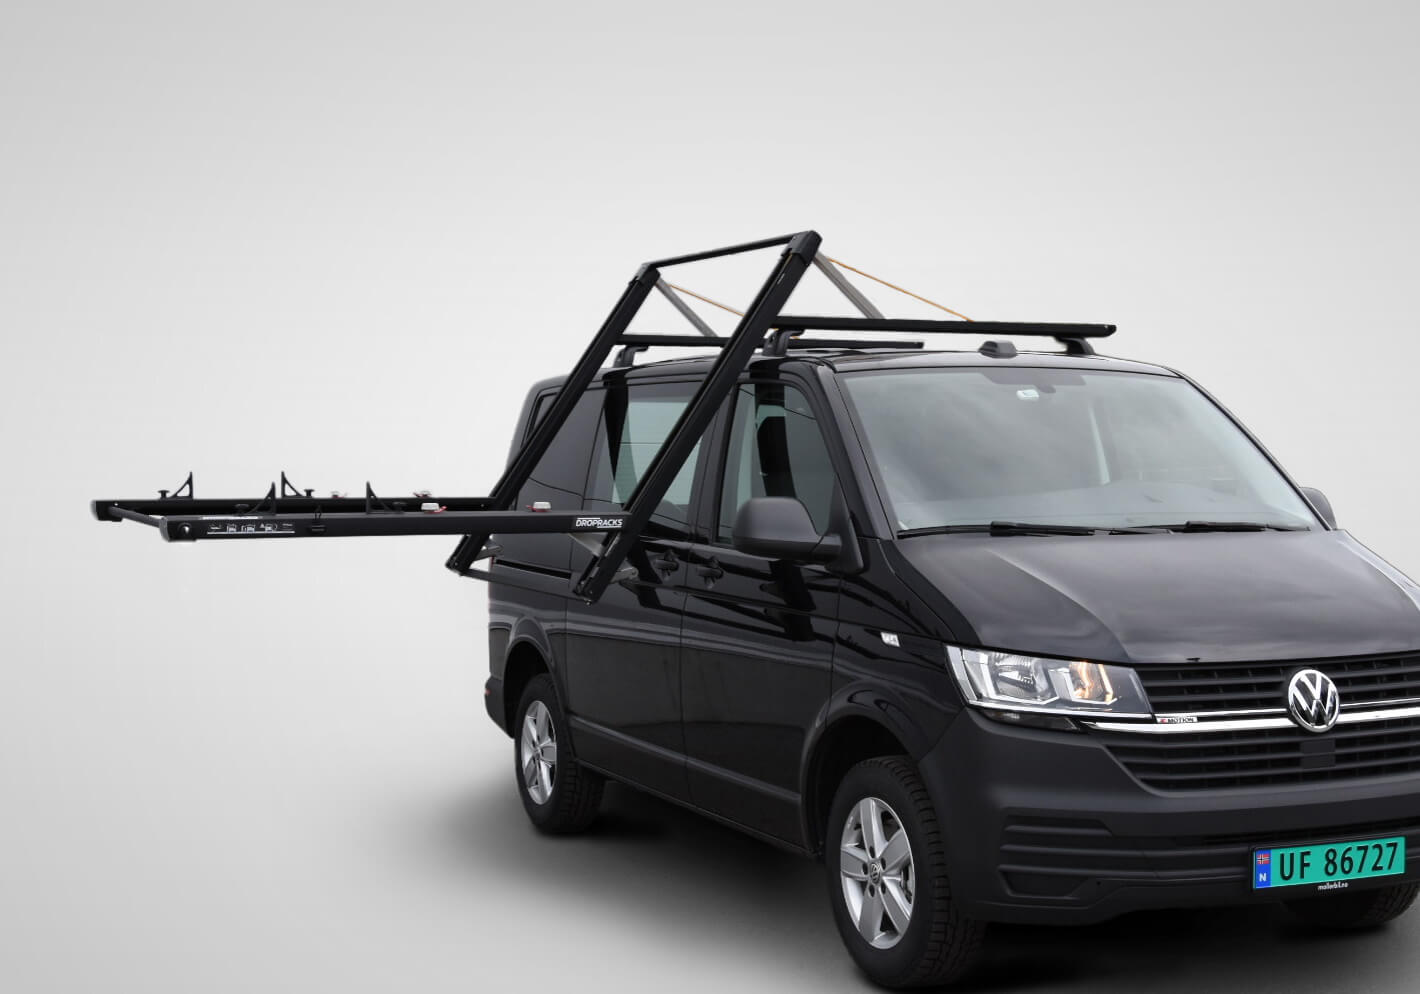 Volkswagen VW T5 Transporter L1 (SWB) H1 (low roof) (2003 to 2015):Dropracks XL roof loading system (vehicle roof connectors at extra cost)